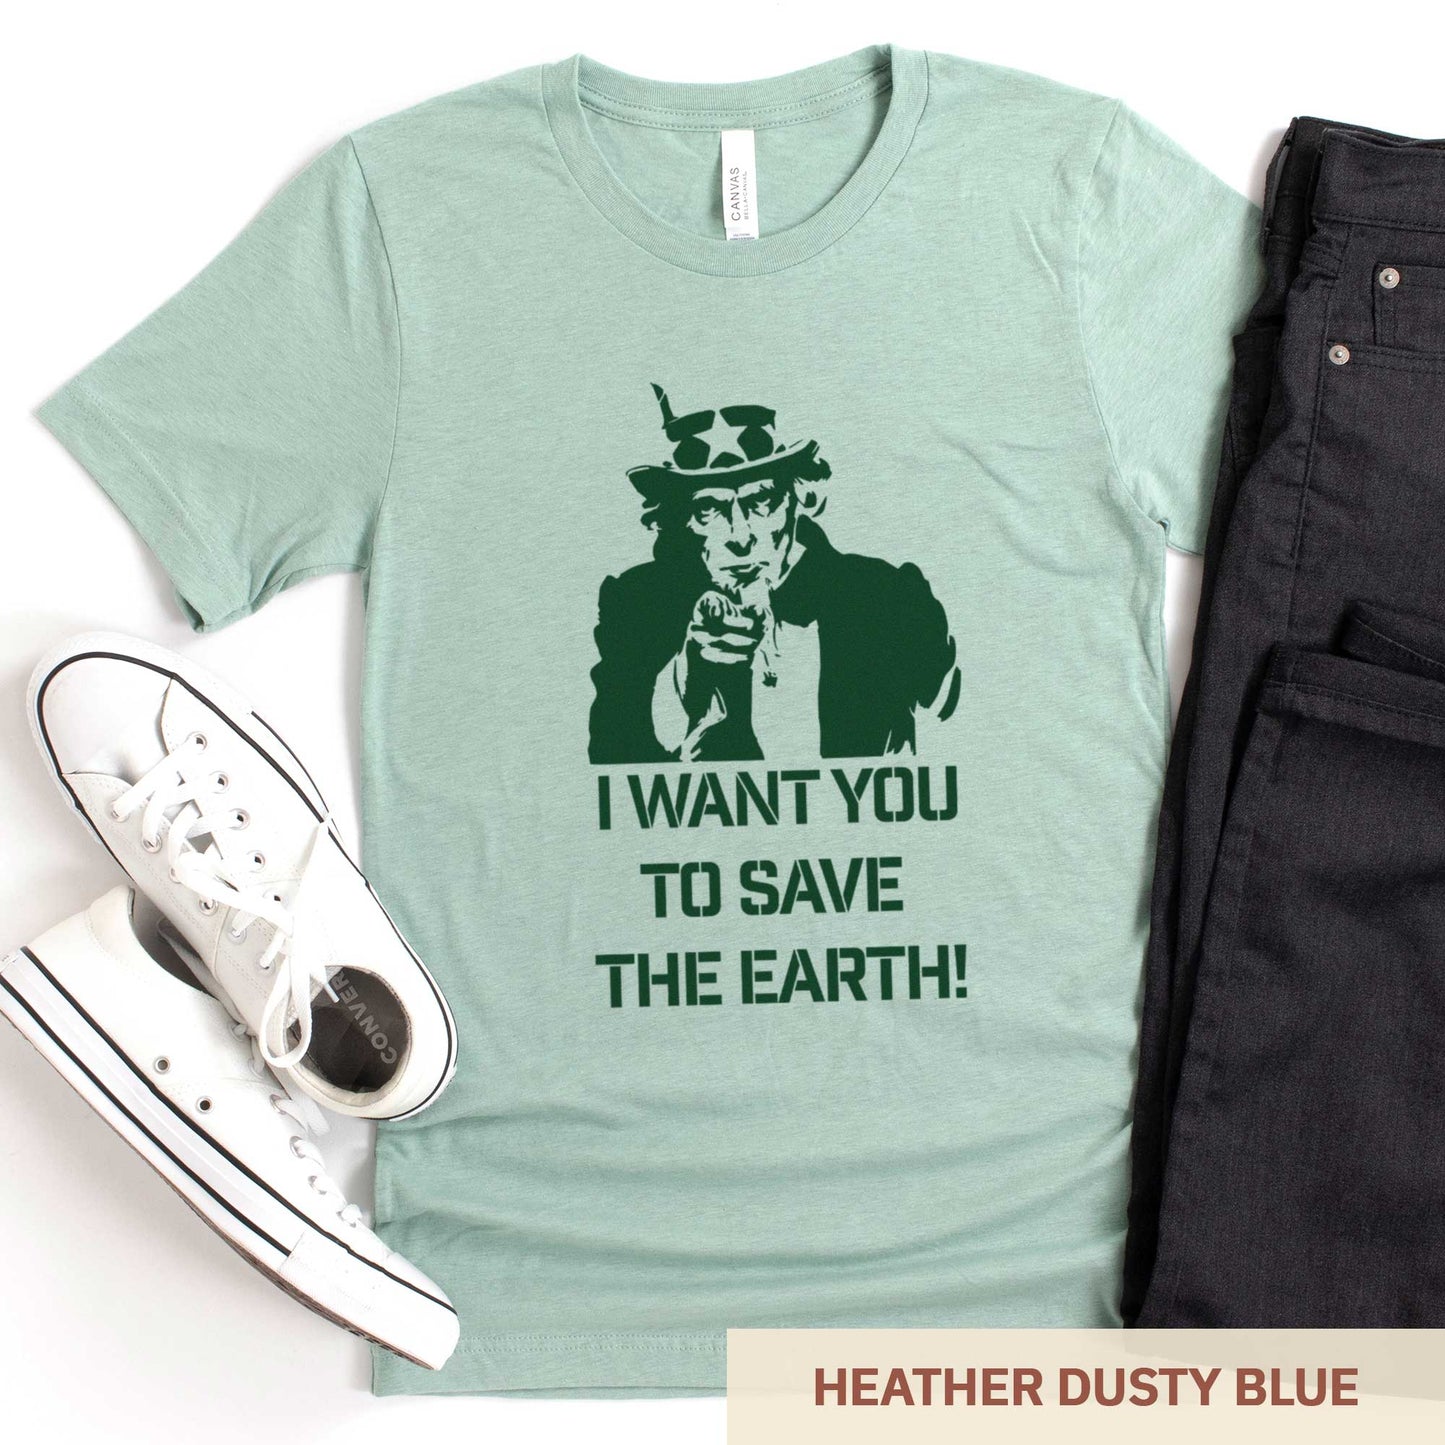 A heather dusty blue Bella Canvas t-shirt featuring Uncle Sam and the words I want you to save the Earth.